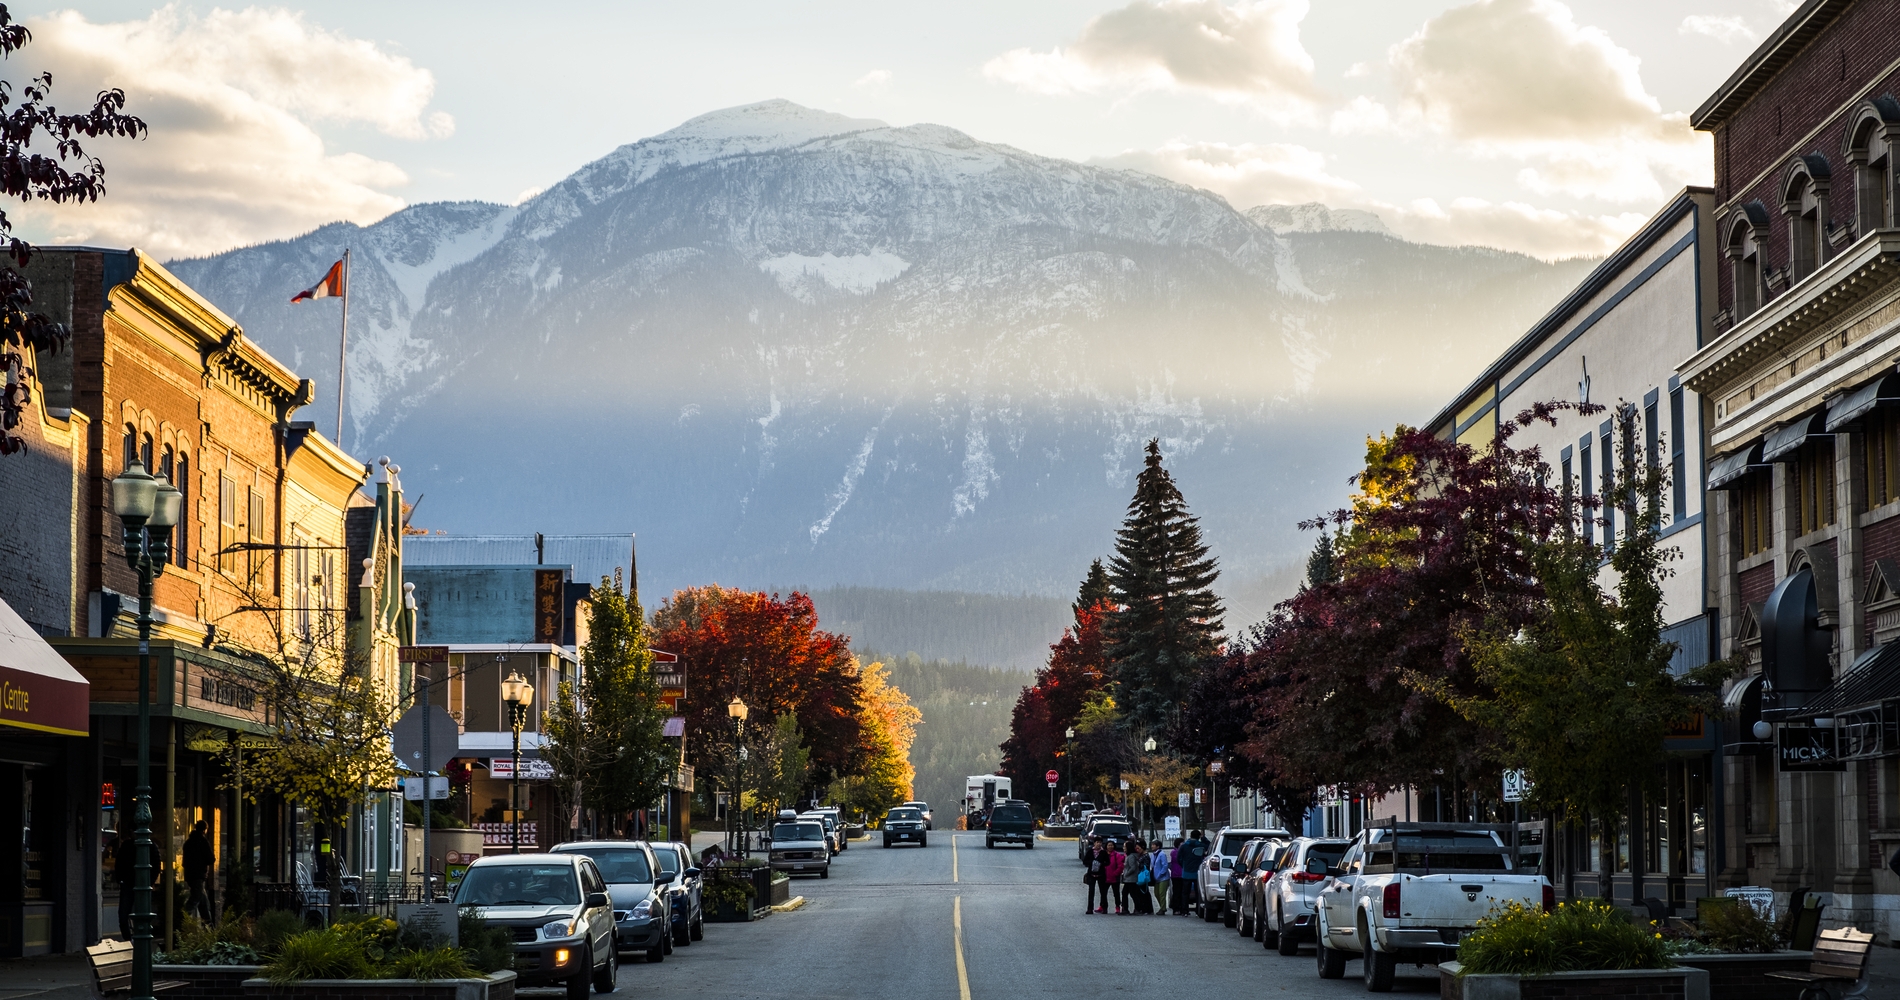 A beautiful Fall day in downtown Revelstoke with a view of the mountains. | Nolan Gale